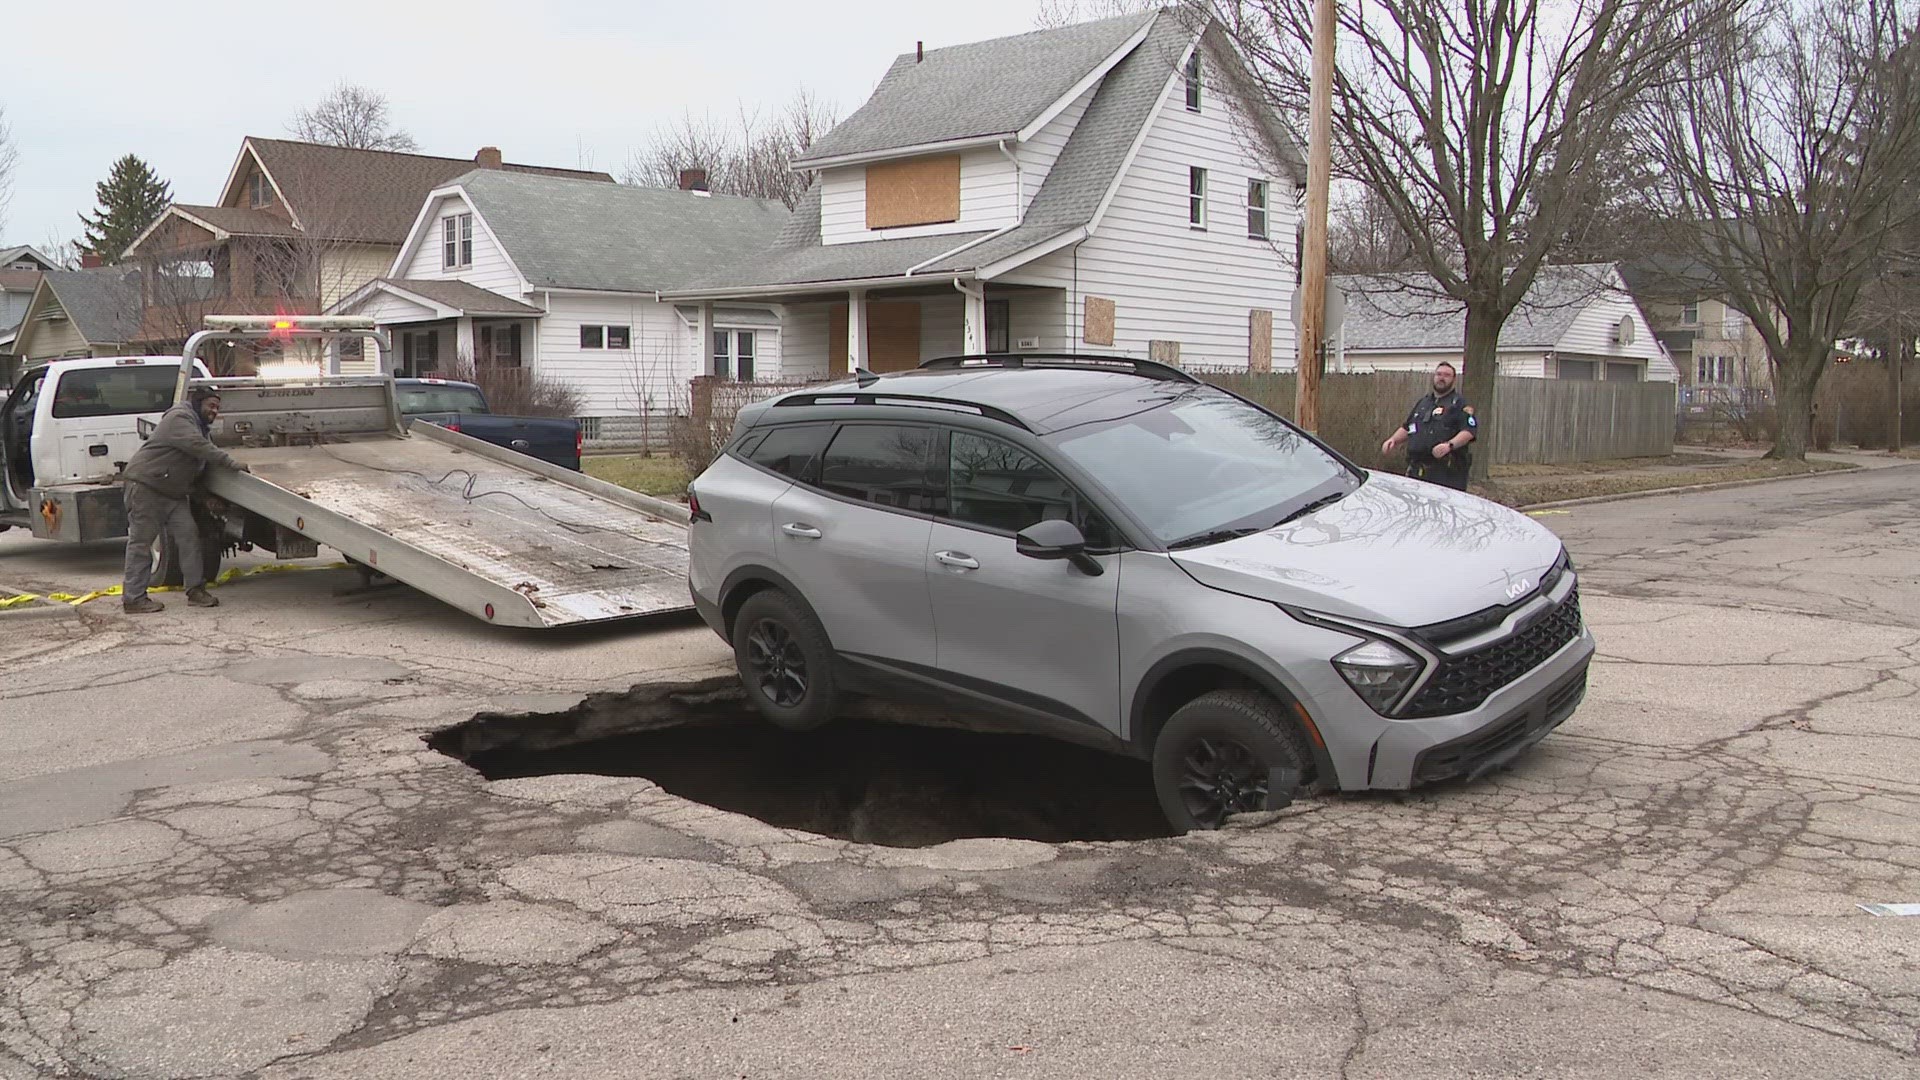 The sinkhole is at West 128th Street and Belden Avenue in Cleveland's Jefferson neighborhood.